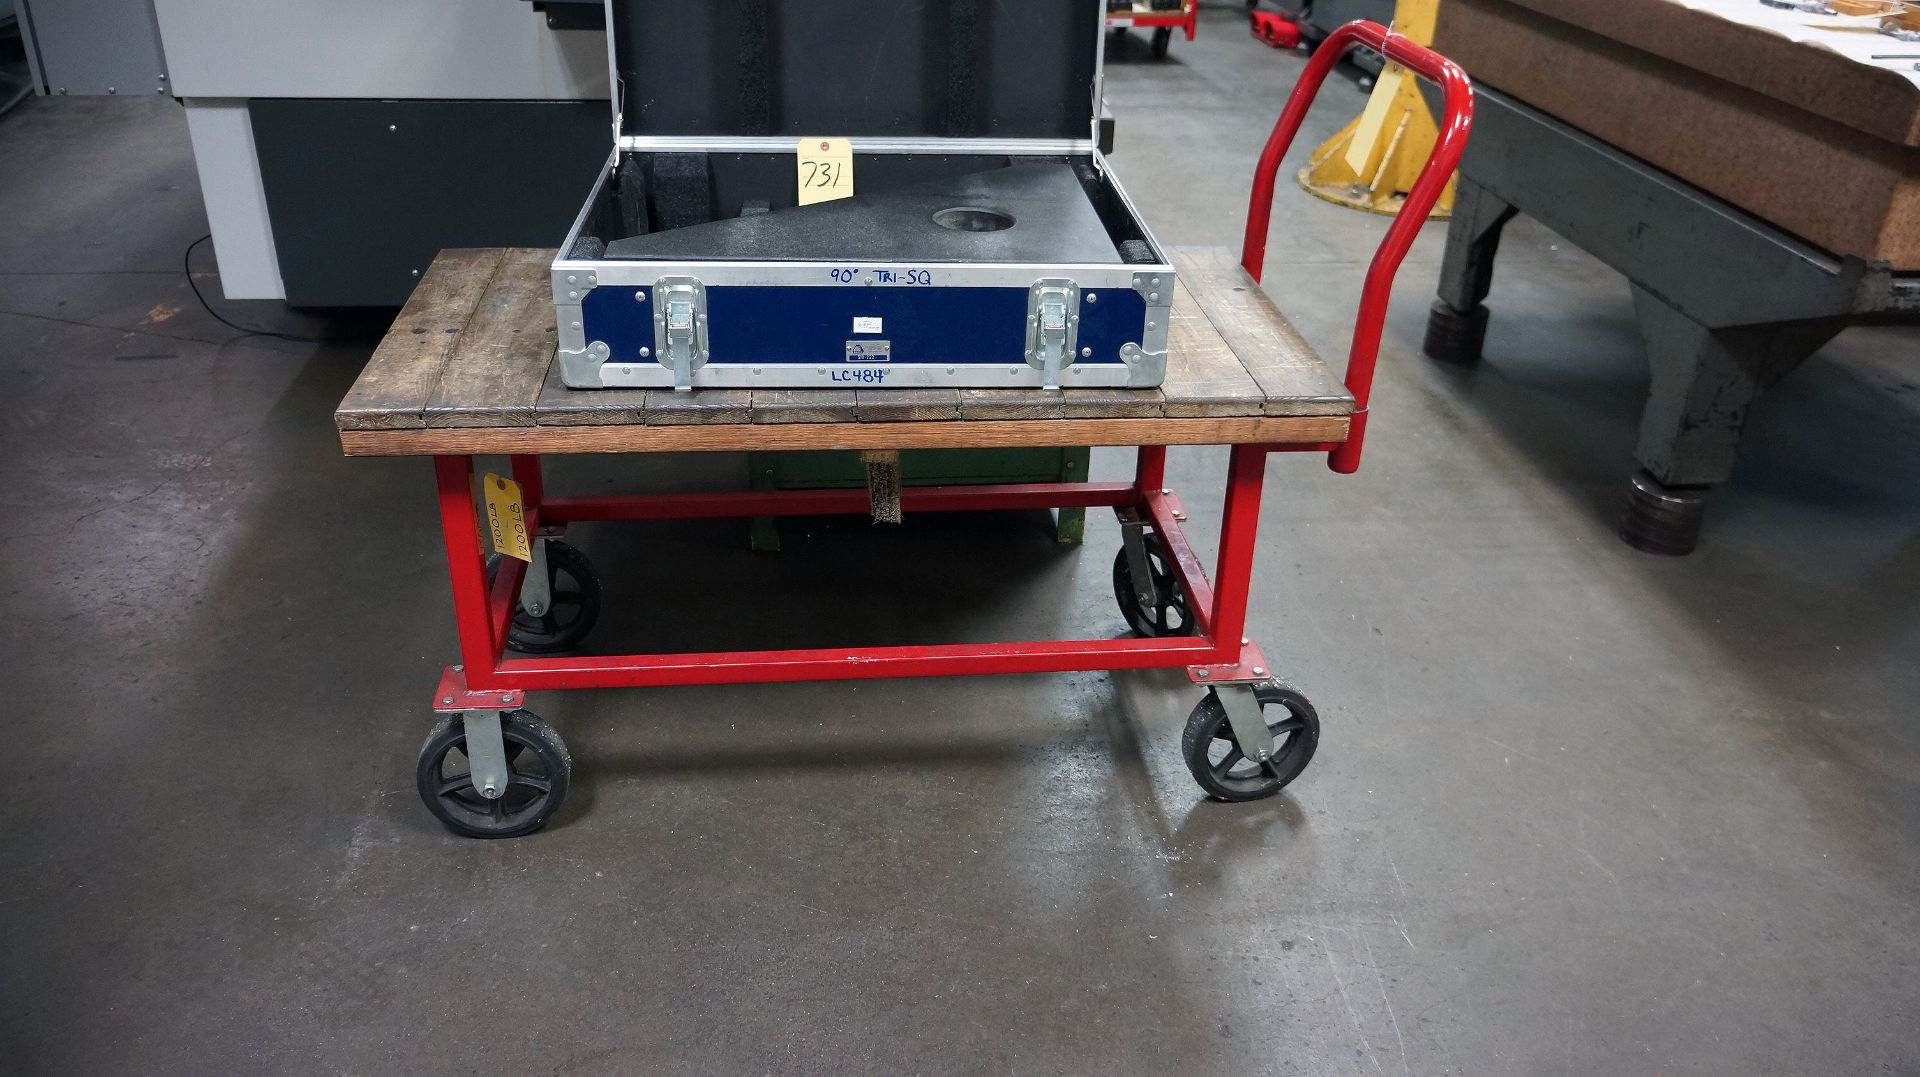 PLATFORM TRUCK, 24" X 48" X 26" HEIGHT ( DELAYED REMOVAL )